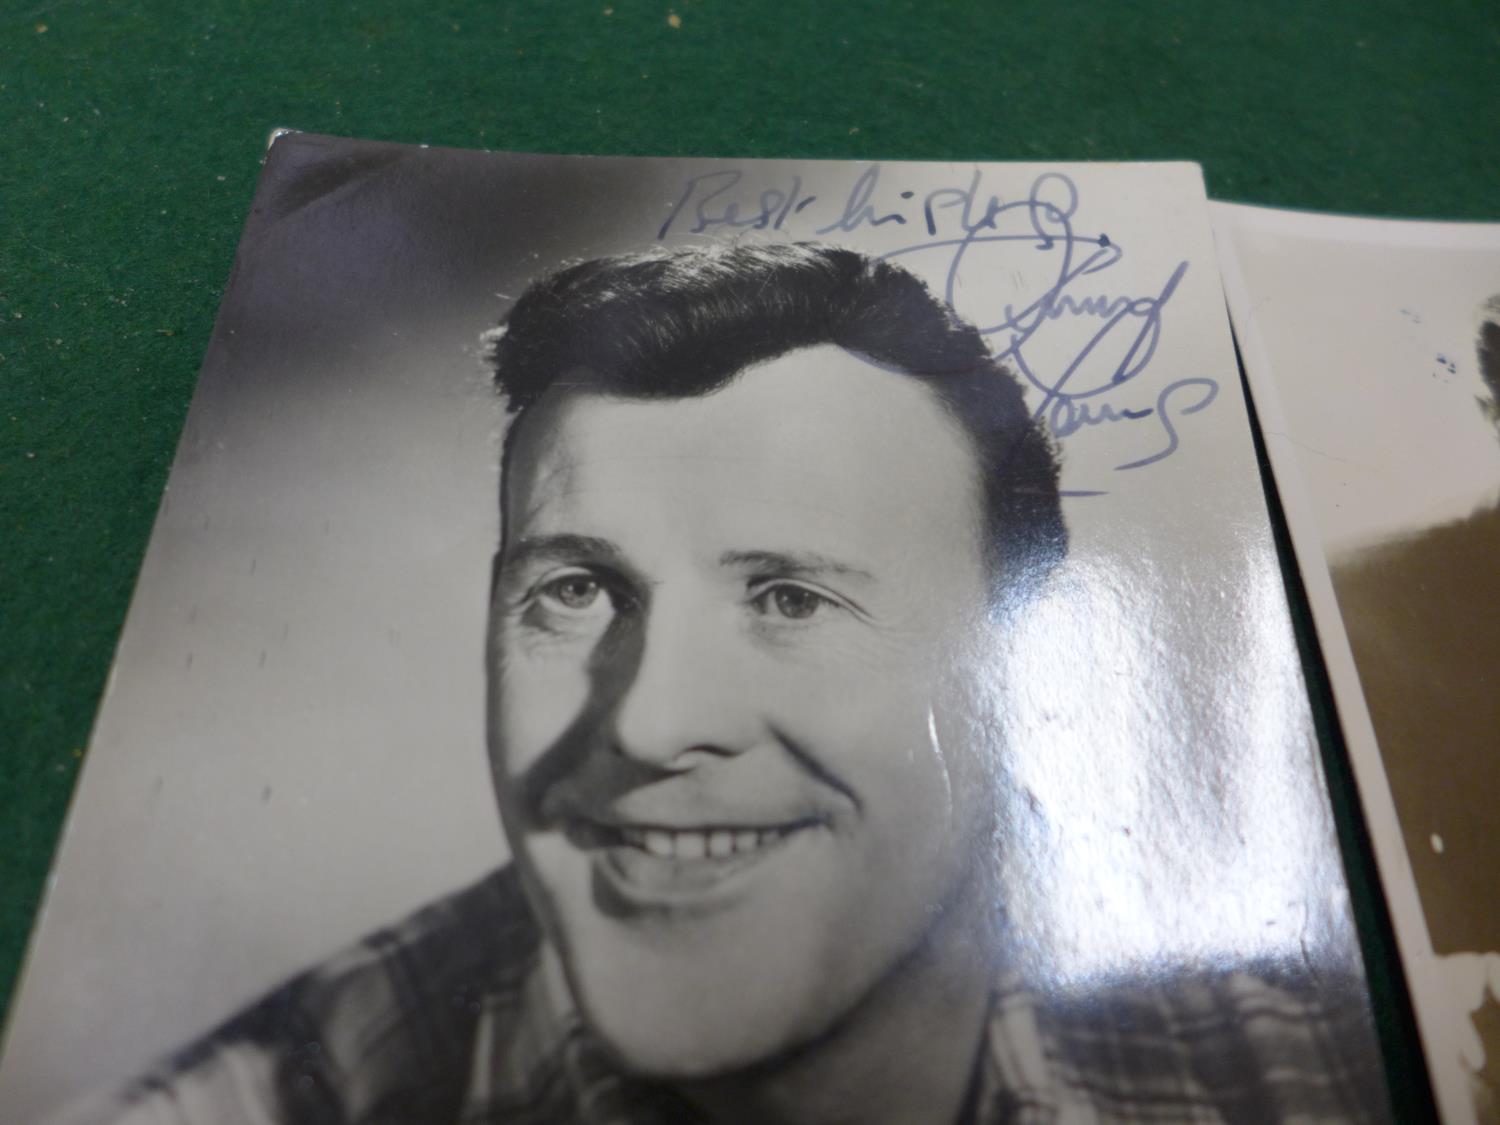 A SIGNED JIMMY YOUNG PHOTOGRAPH, SIGNED EMILE FORD POSTCARD AND A CREW CUTS POSTCARD - Image 2 of 5